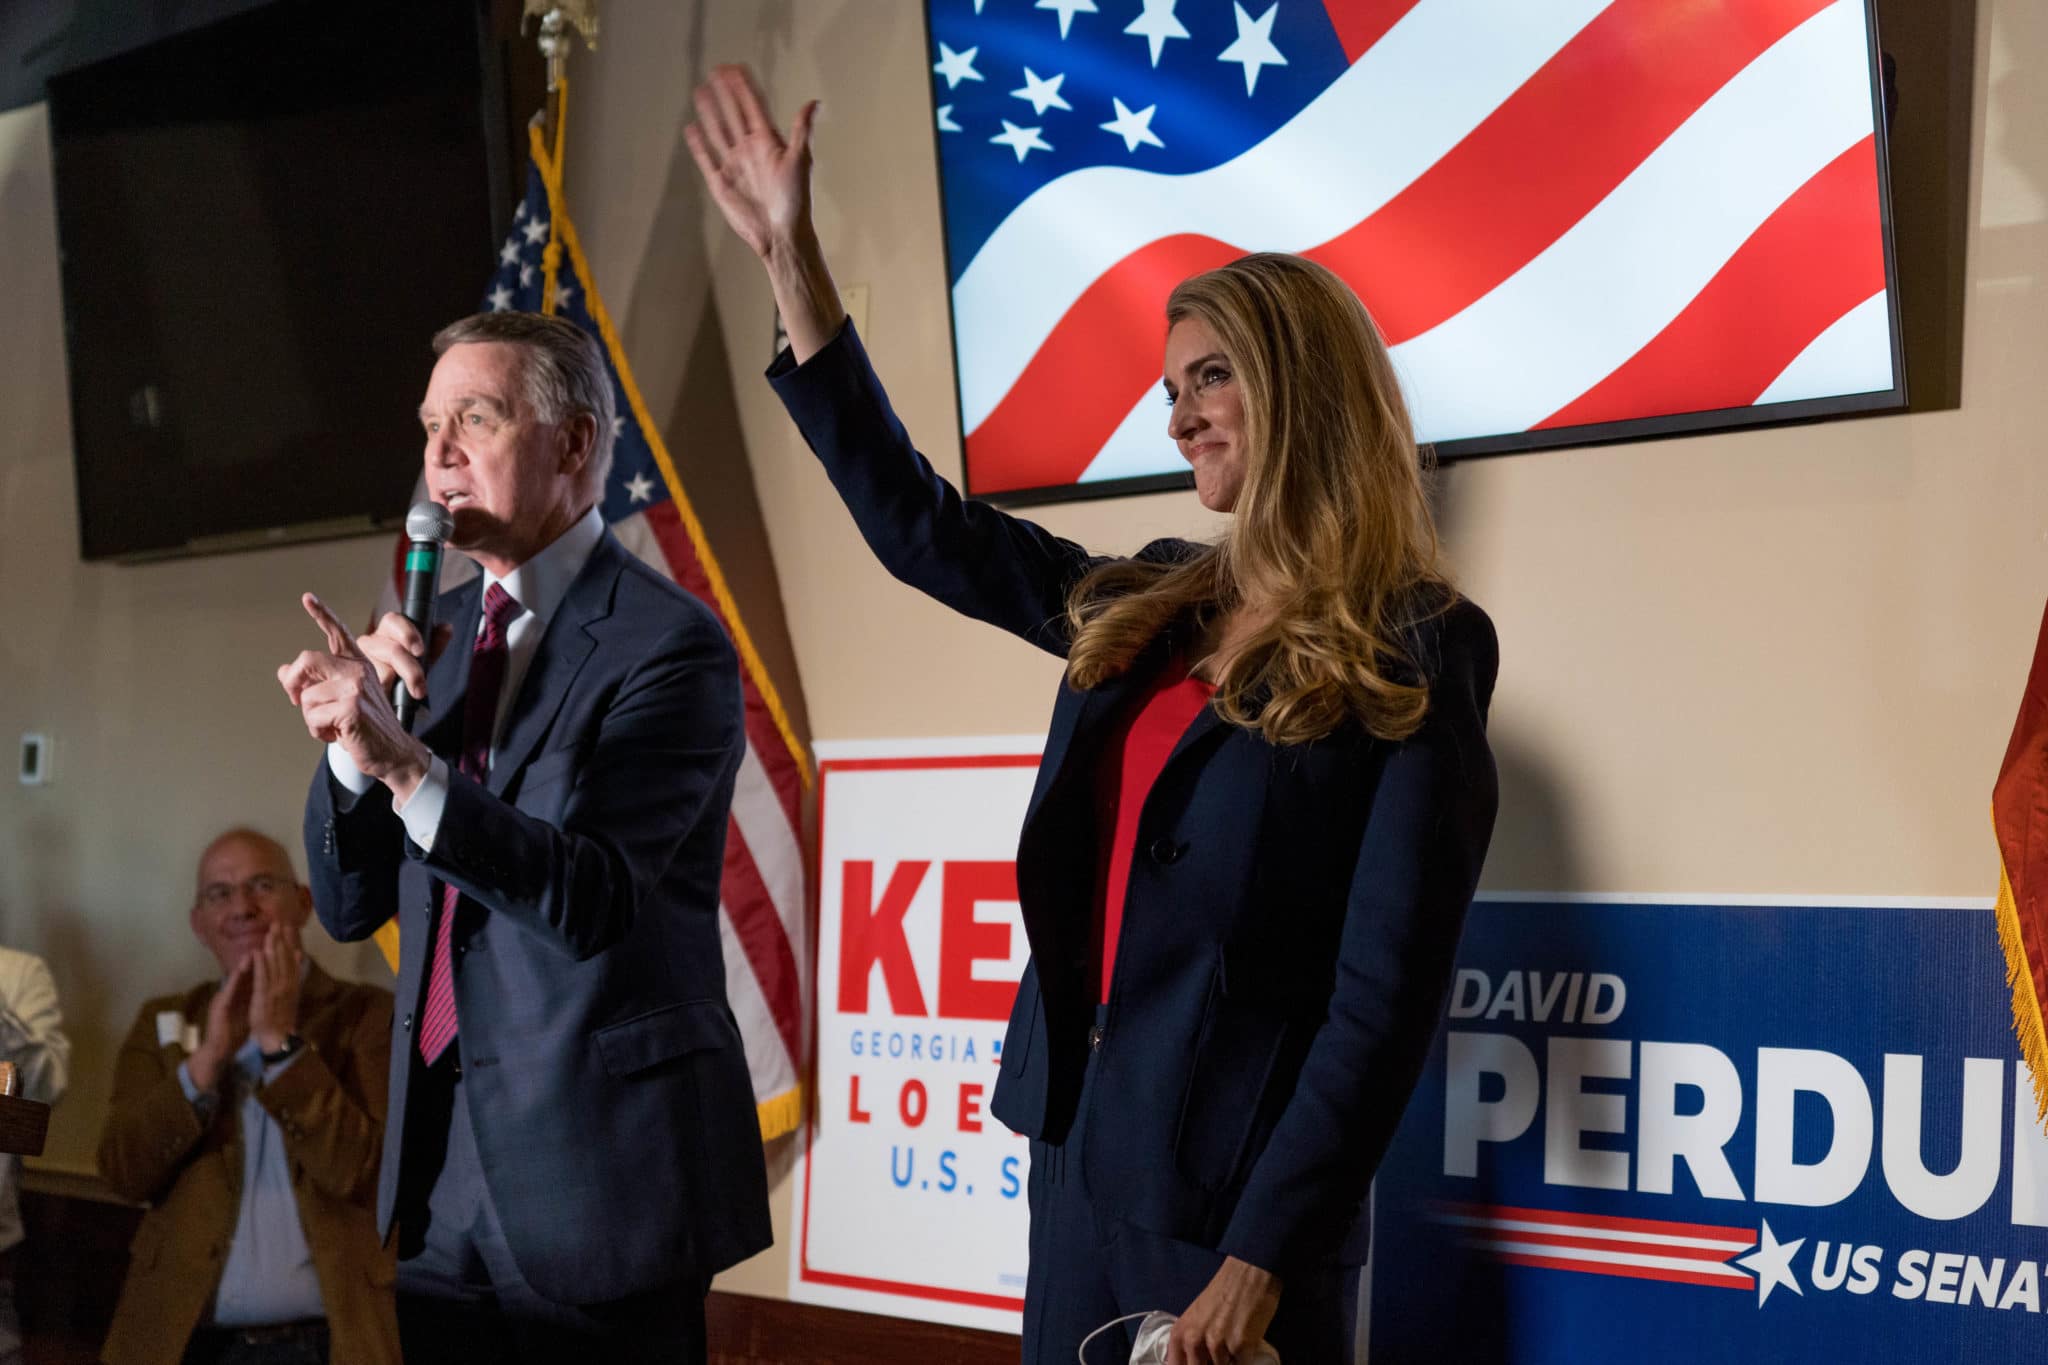 David Perdue and Kelly Loeffler speak at a campaign event